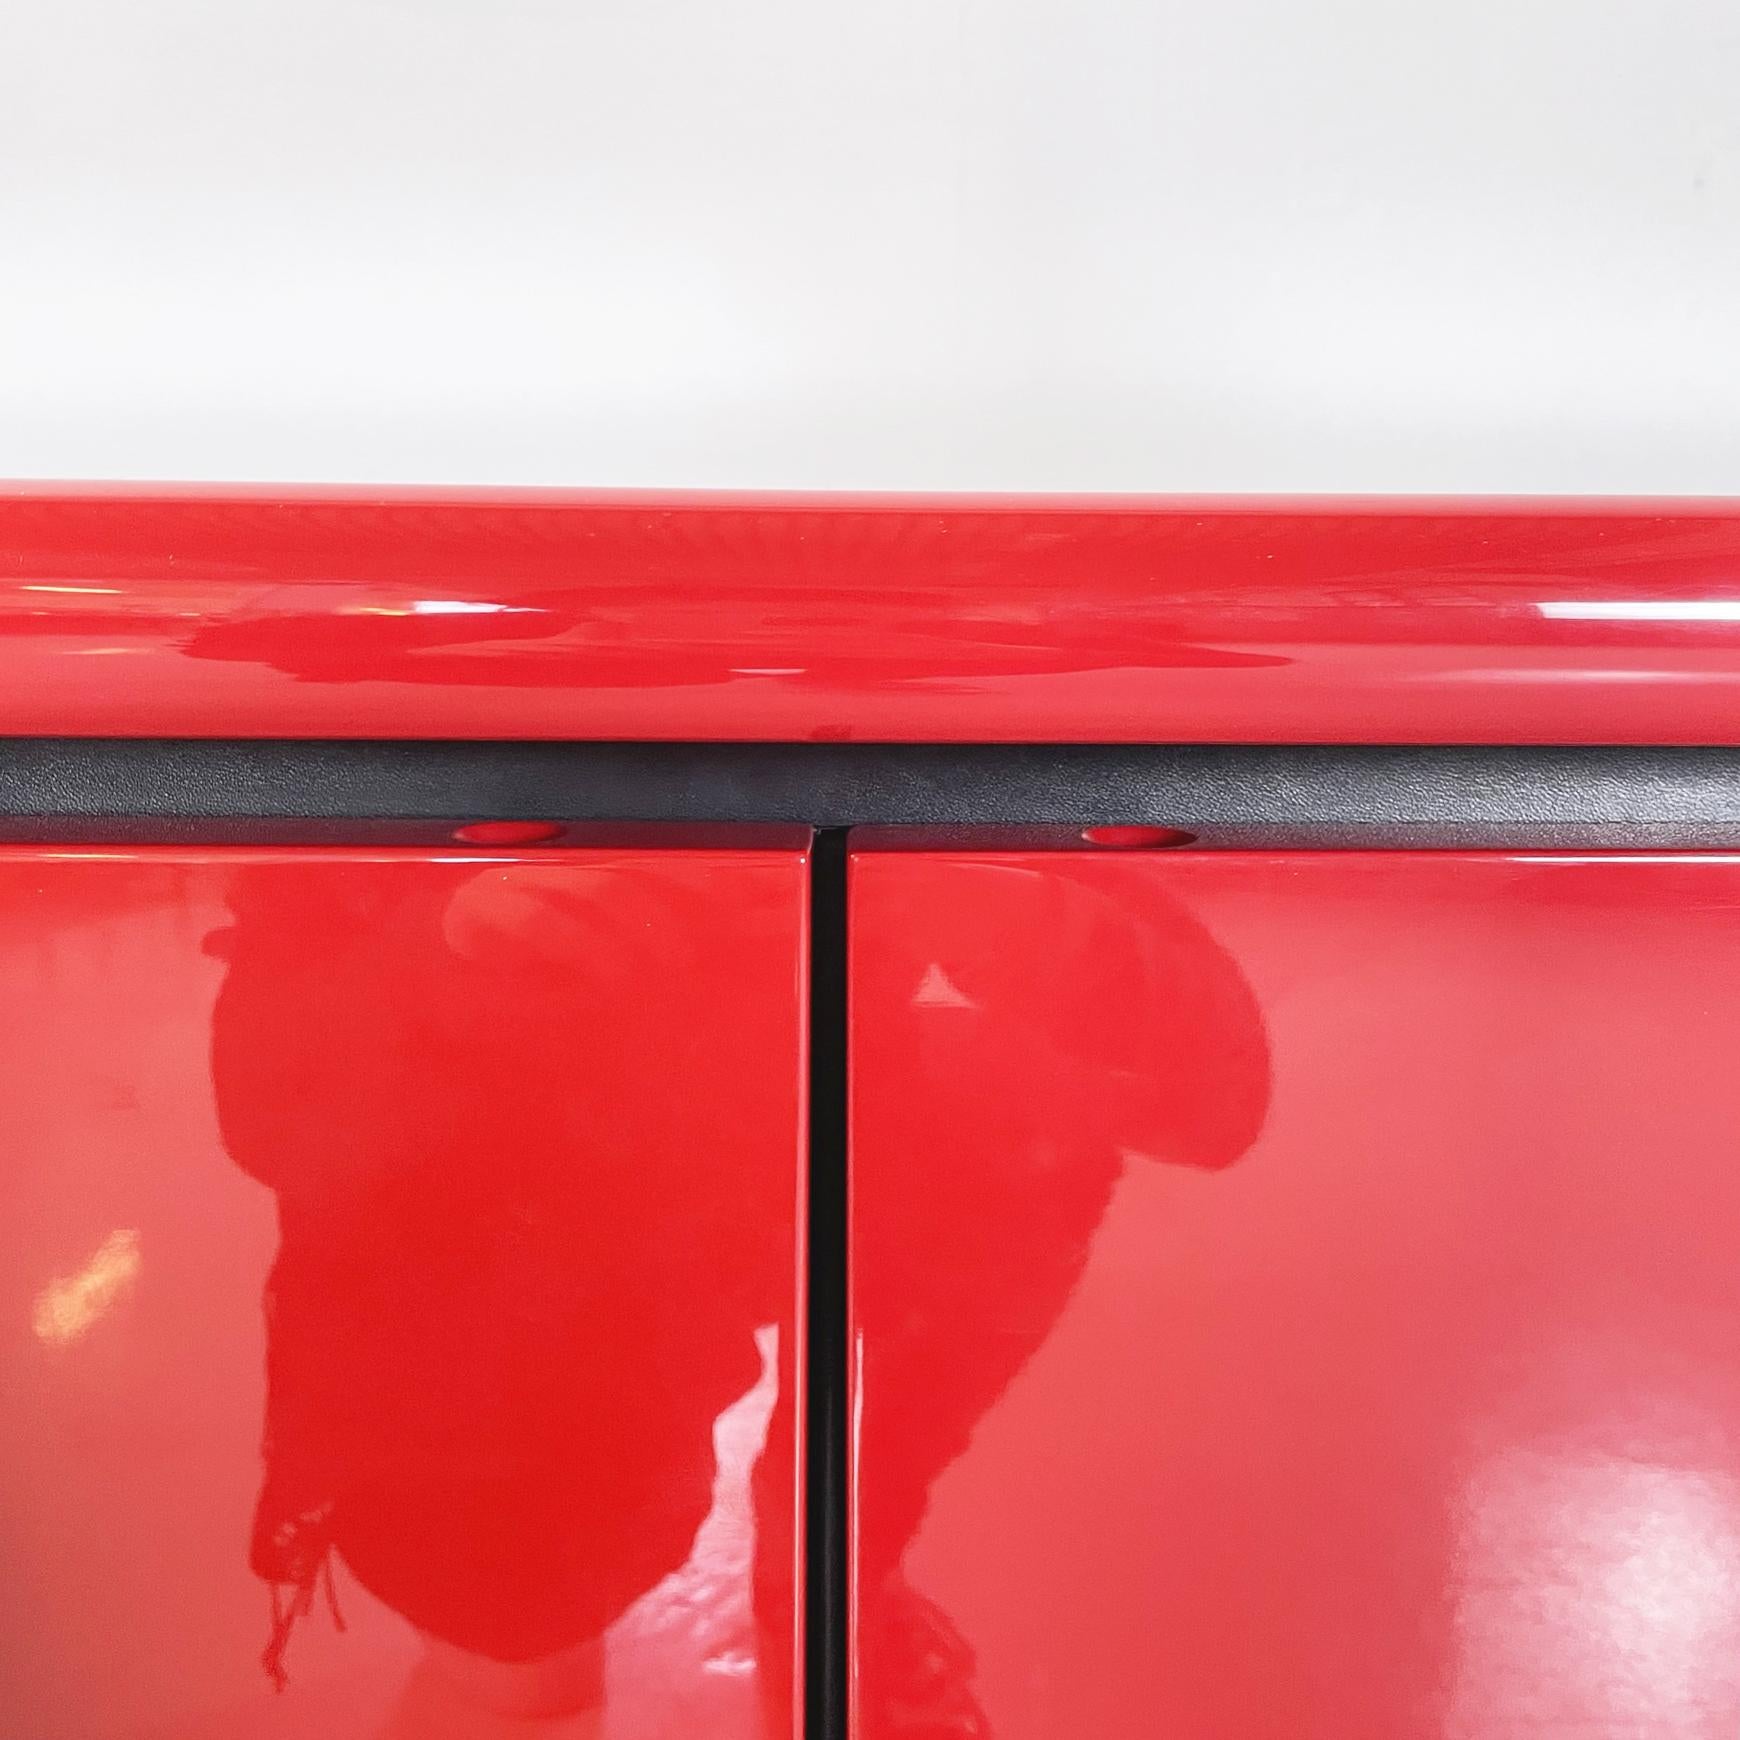 Italian Modern Red Sideboard Sheraton by Stoppino and Acerbis for Acerbis, 1977 For Sale 4